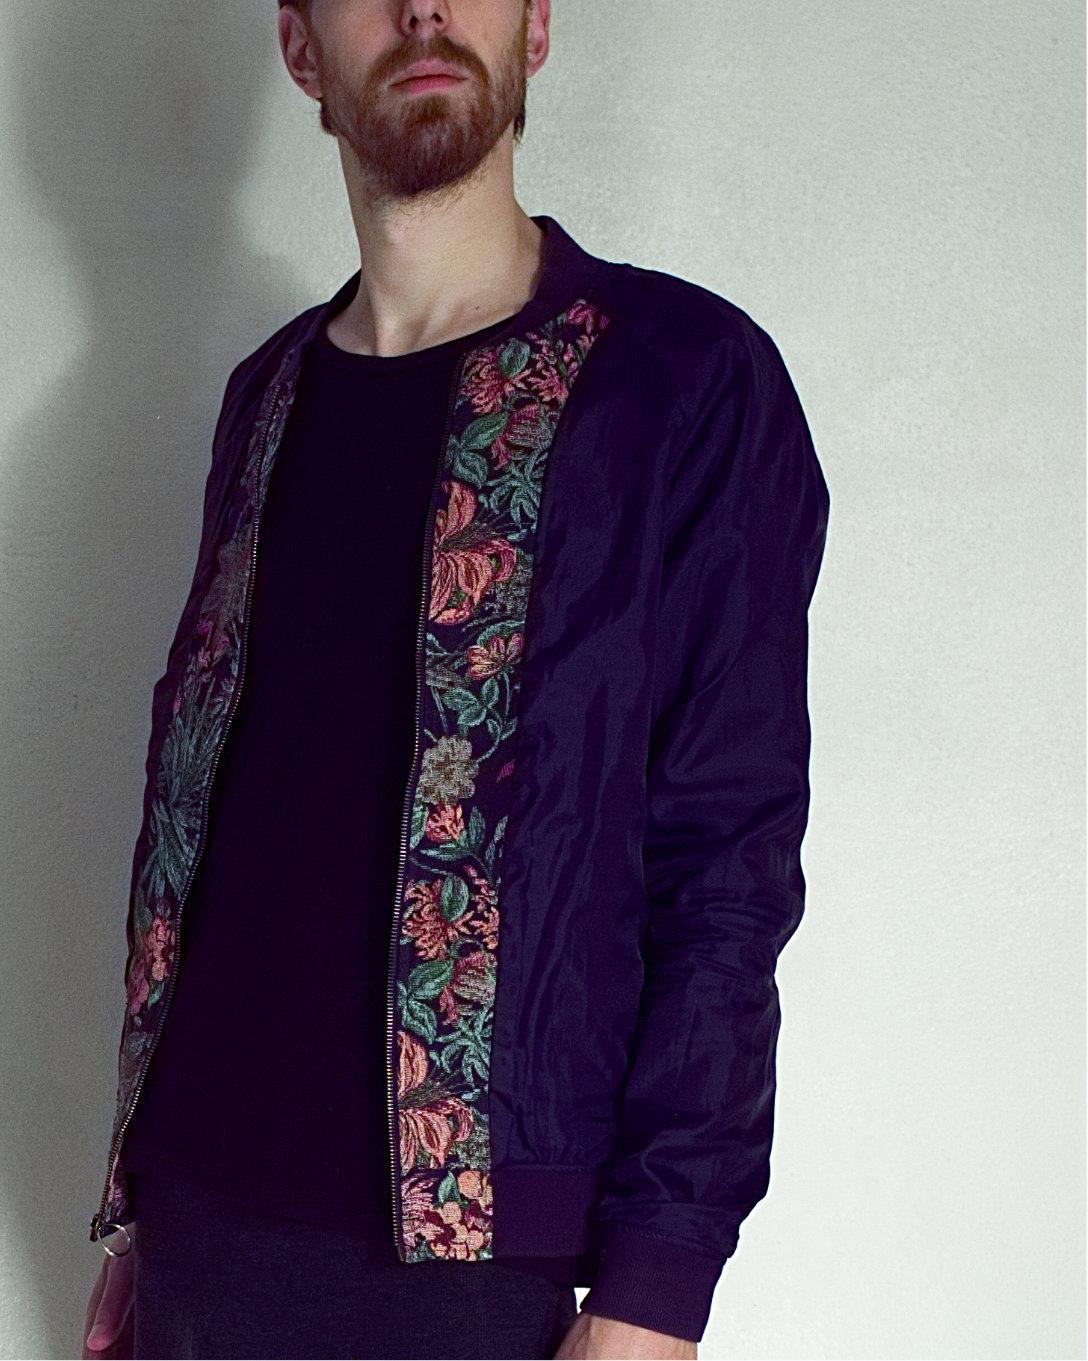 Model wears blue and floral jacket, their eyes are outside the frame hidden